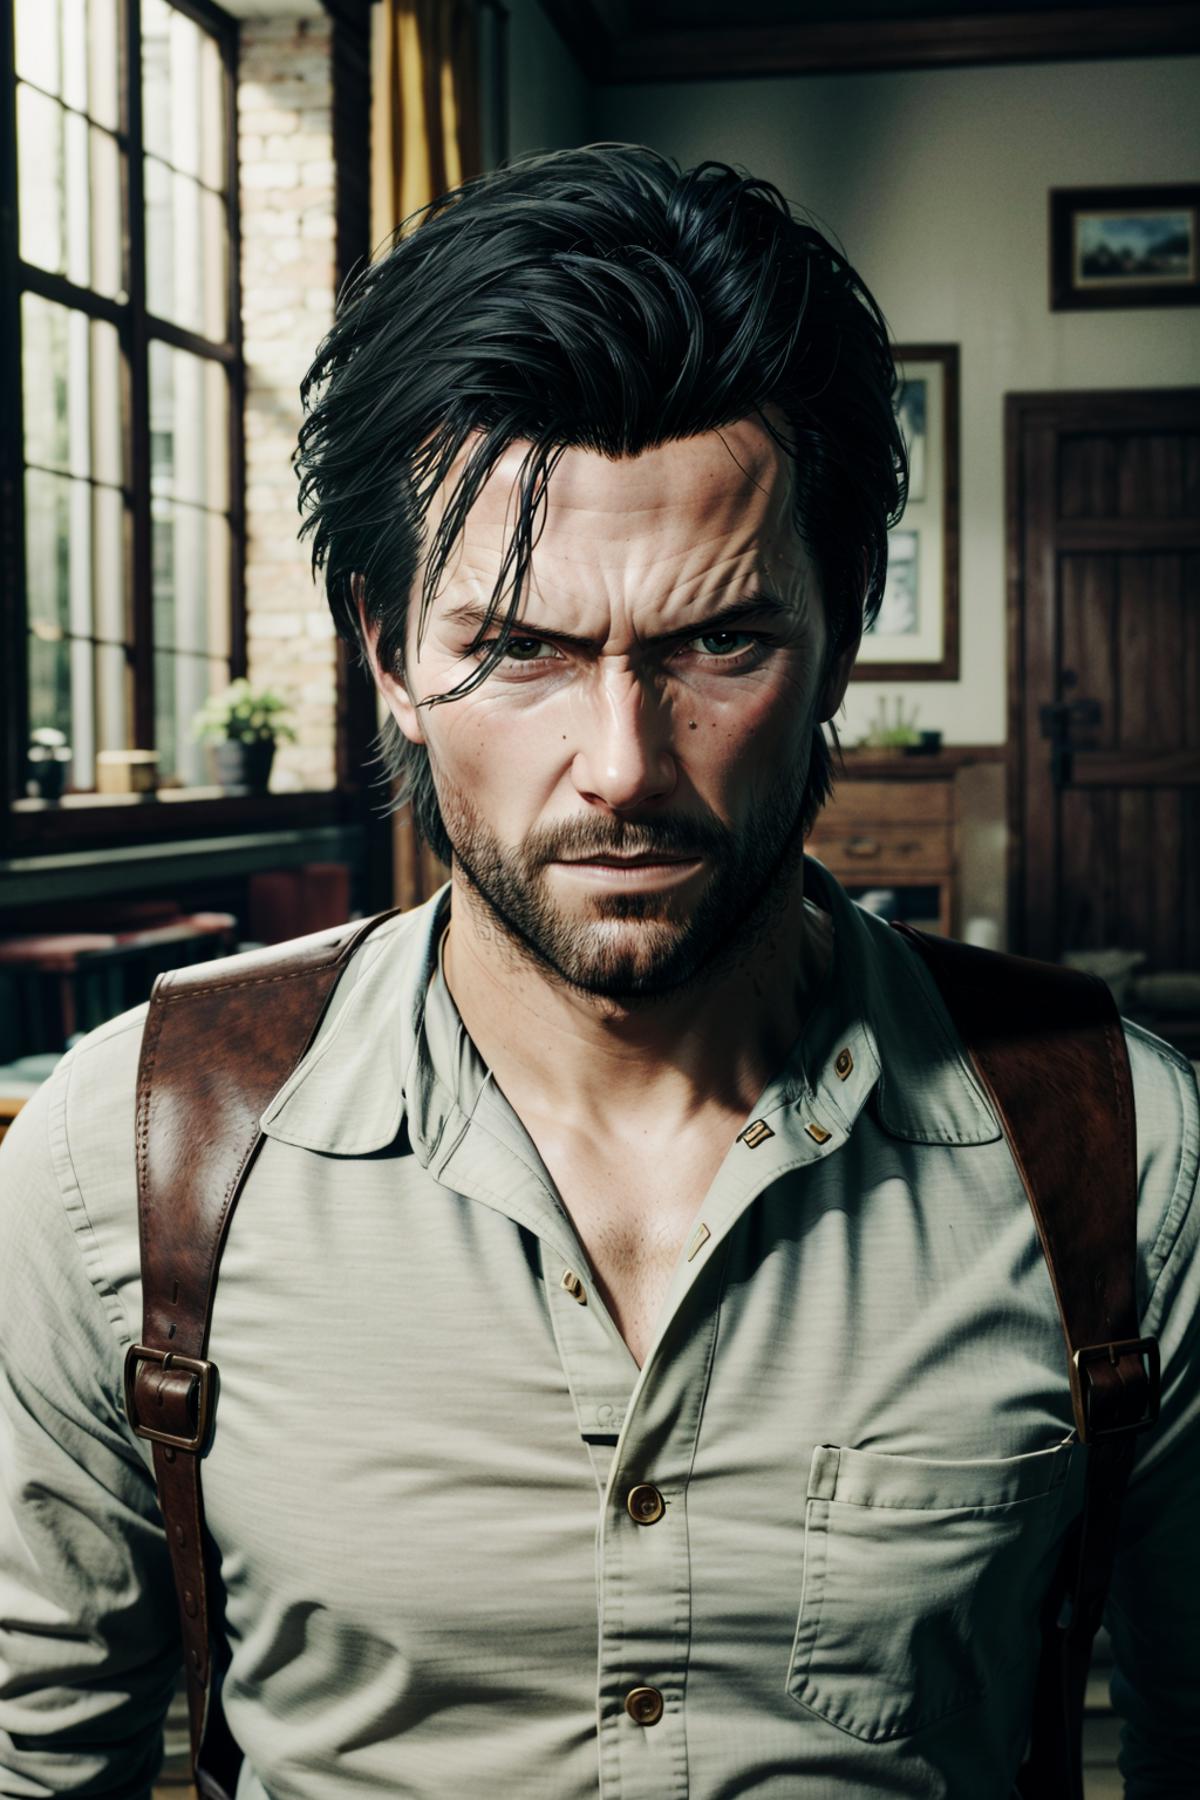 Sebastian from The Evil Within 2 image by BloodRedKittie